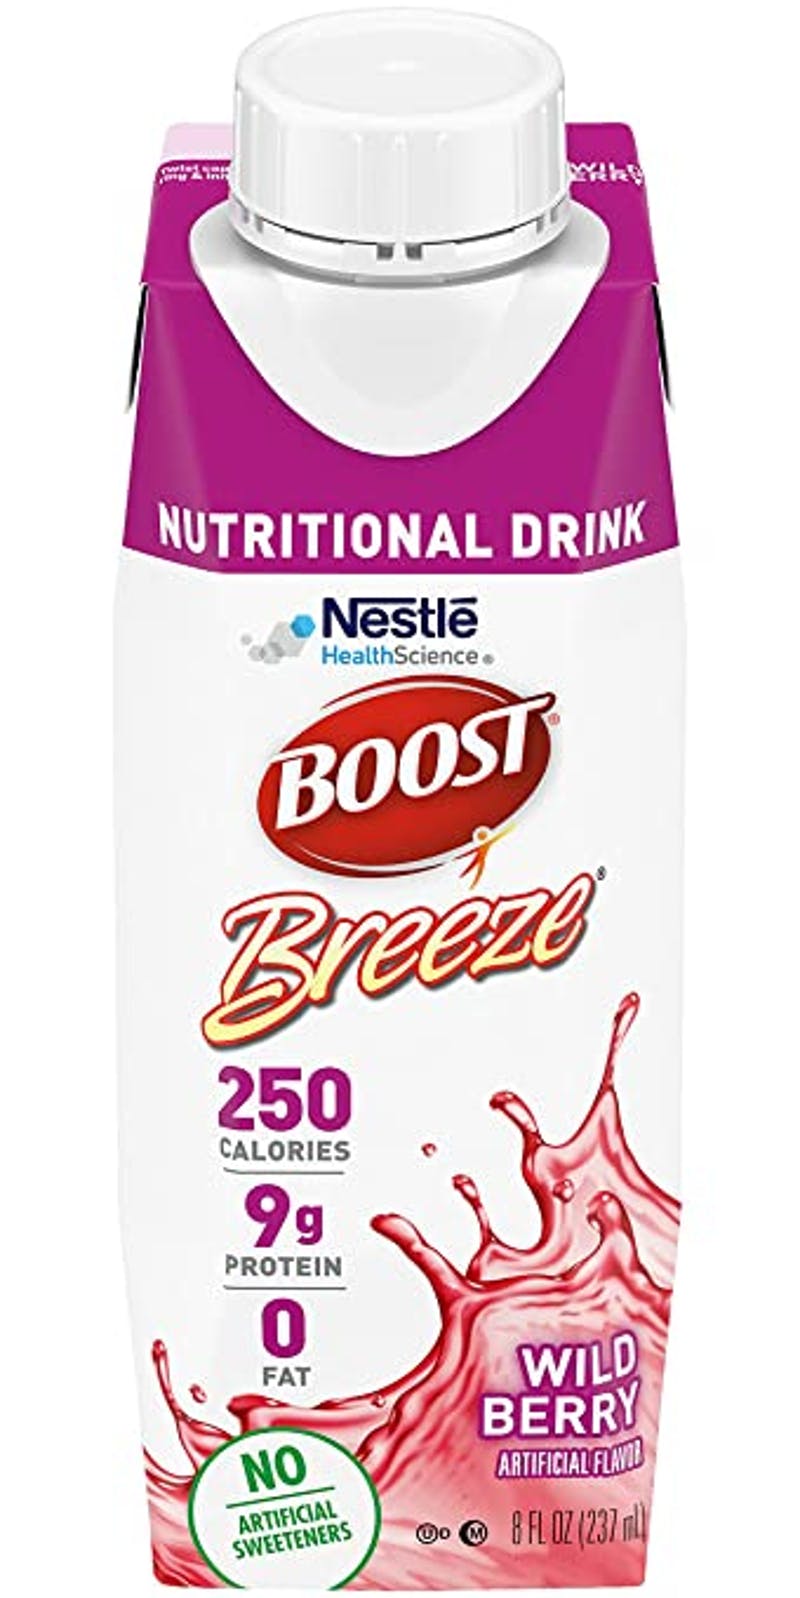 Boost Breeze Nutritional Drink, Wild Berry, 8 oz., 00043900685601-CS24, Case of 24, Front